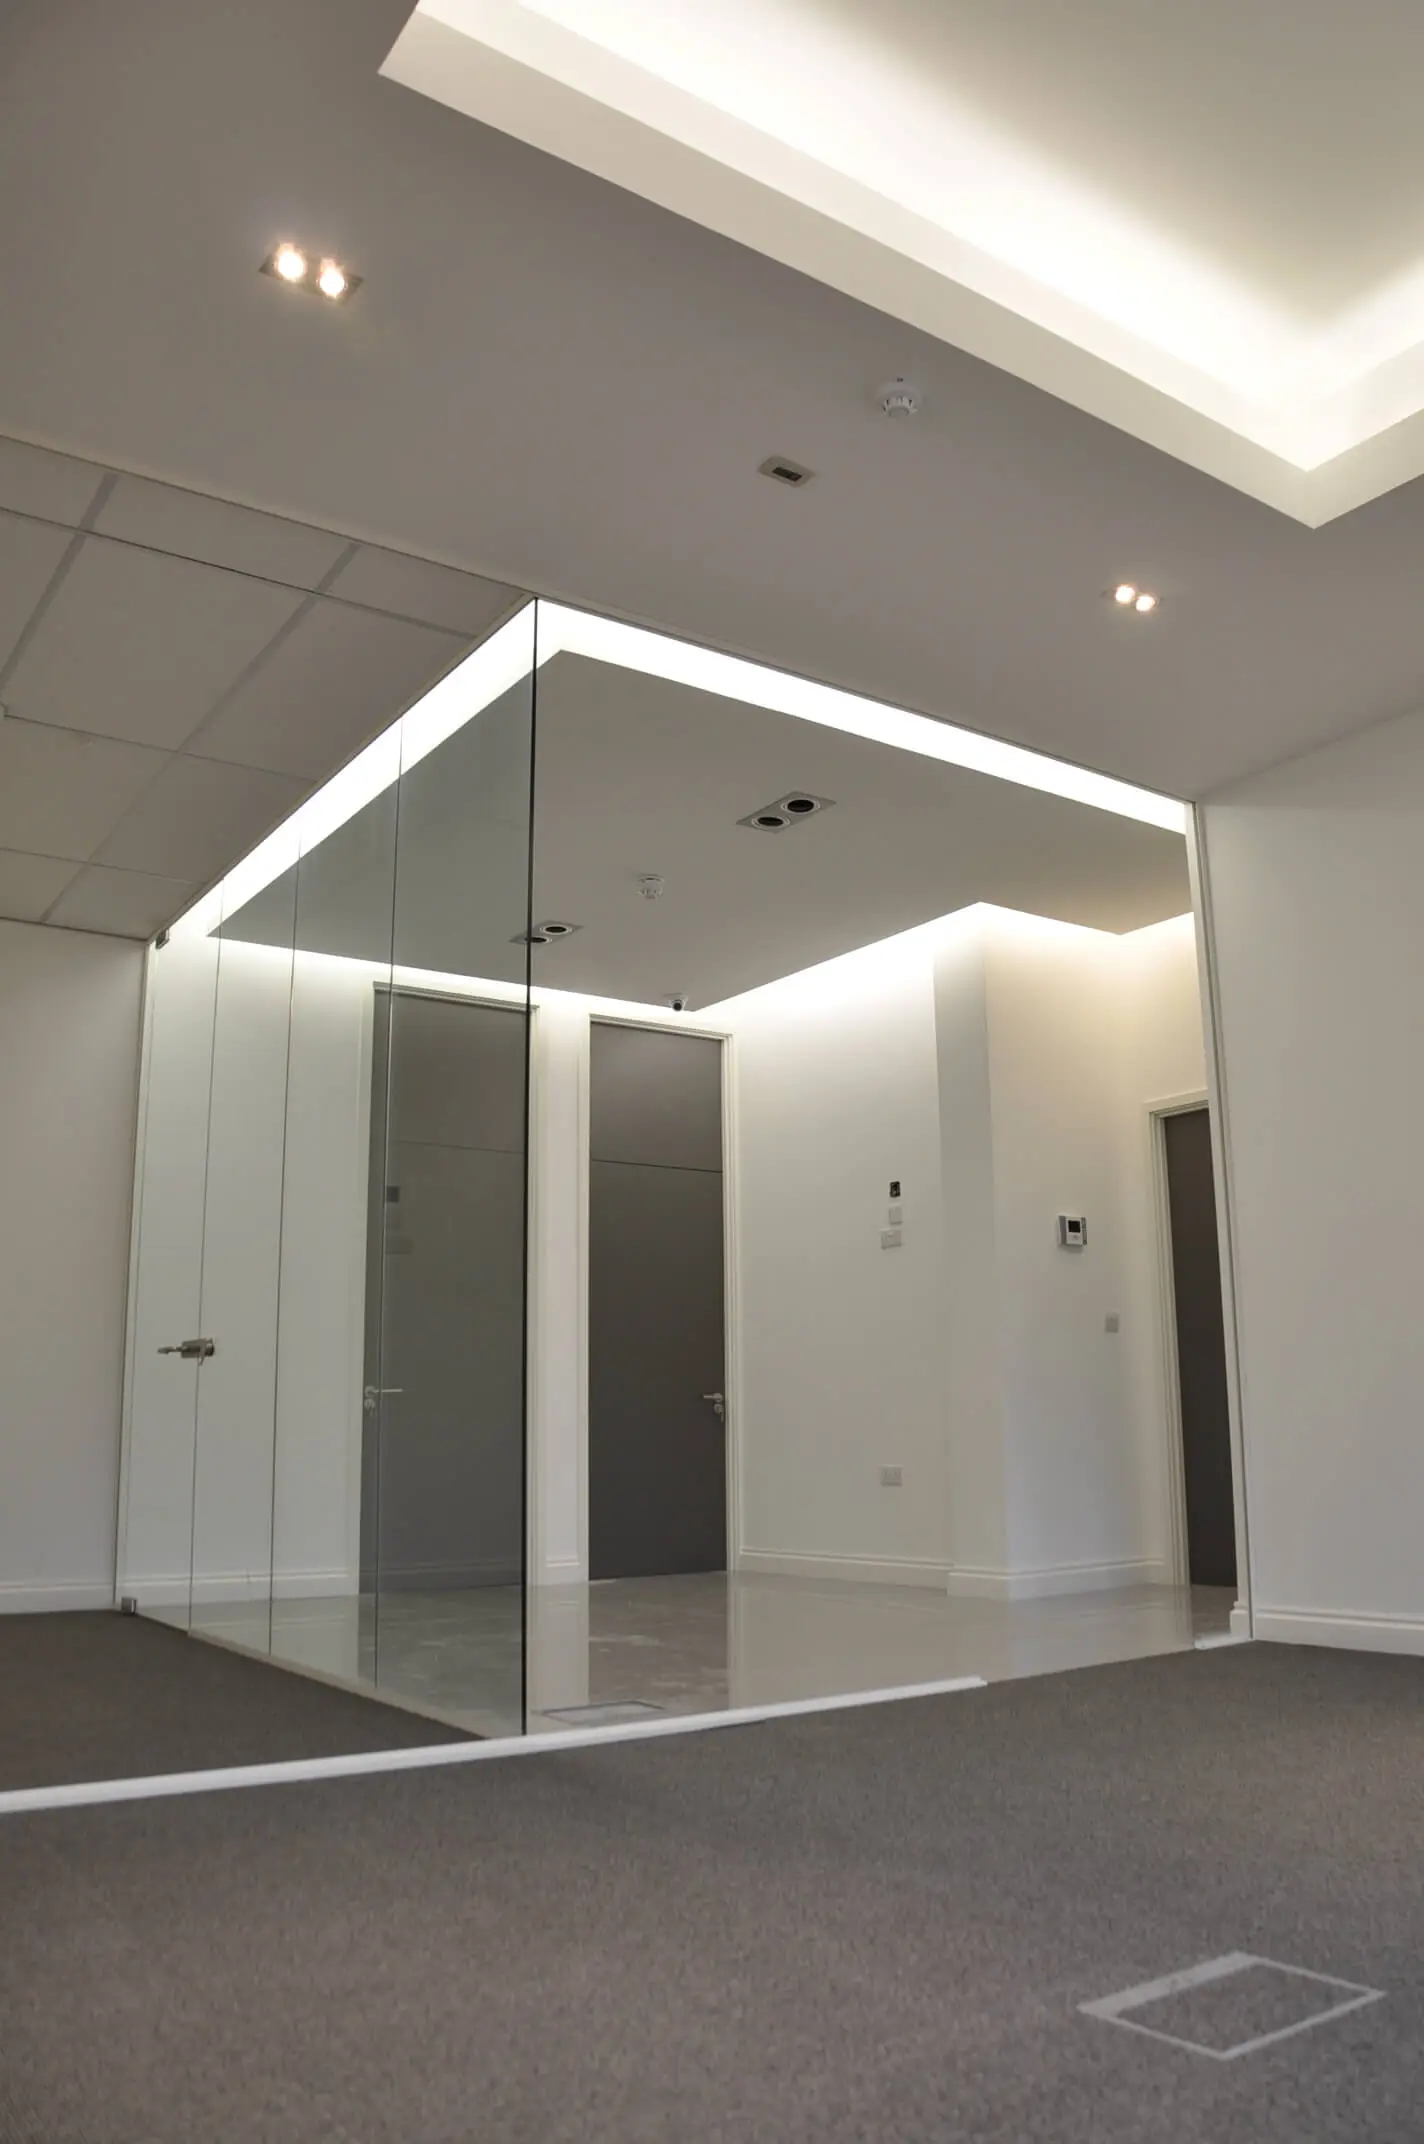 Office space partitions with frameless glass and lighting